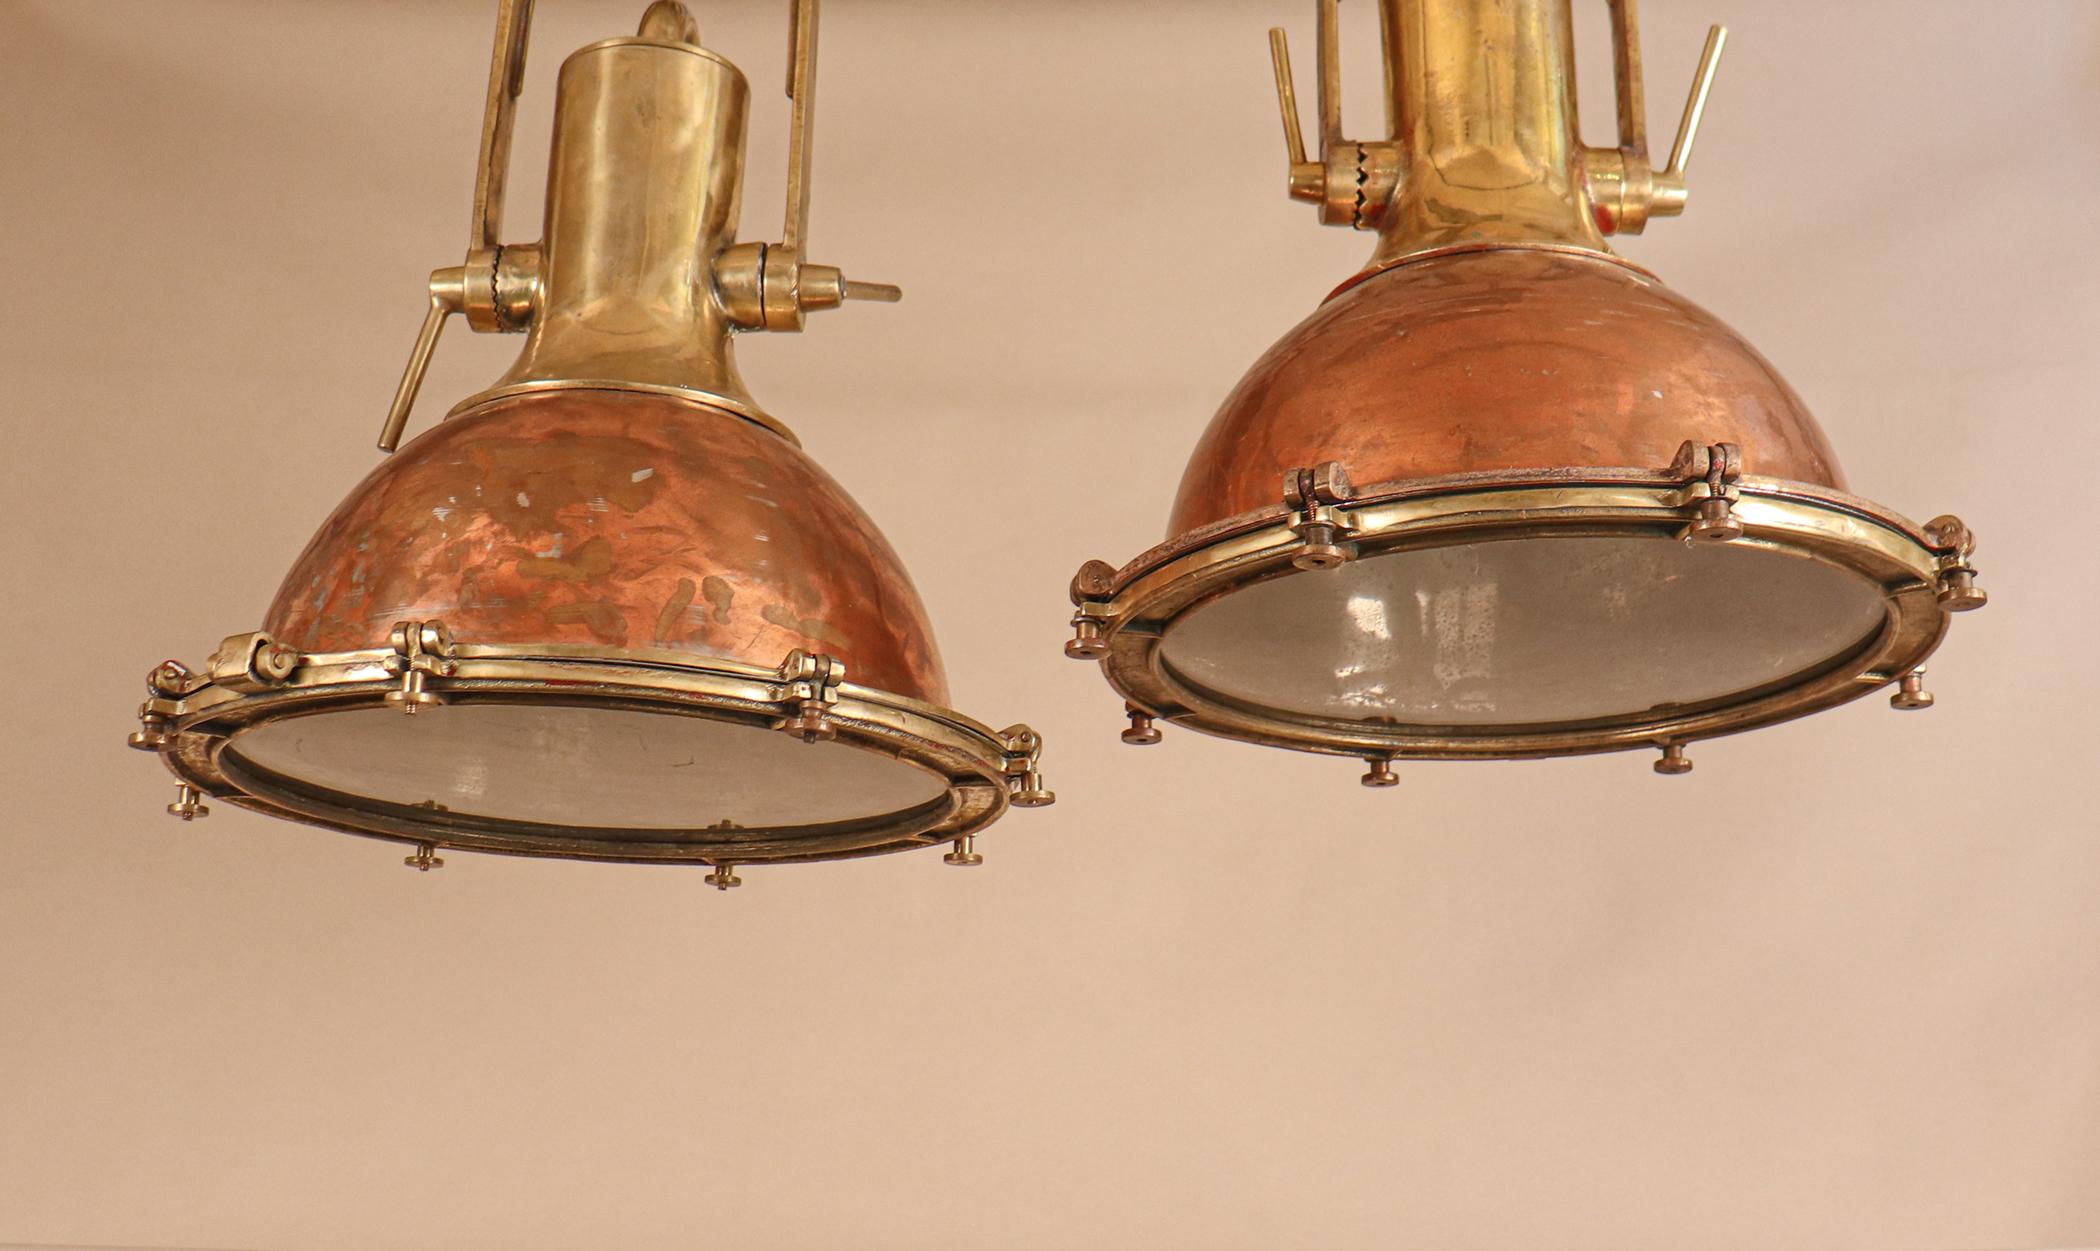 Industrial Set of Large Copper and Brass Nautical Pendant Lights